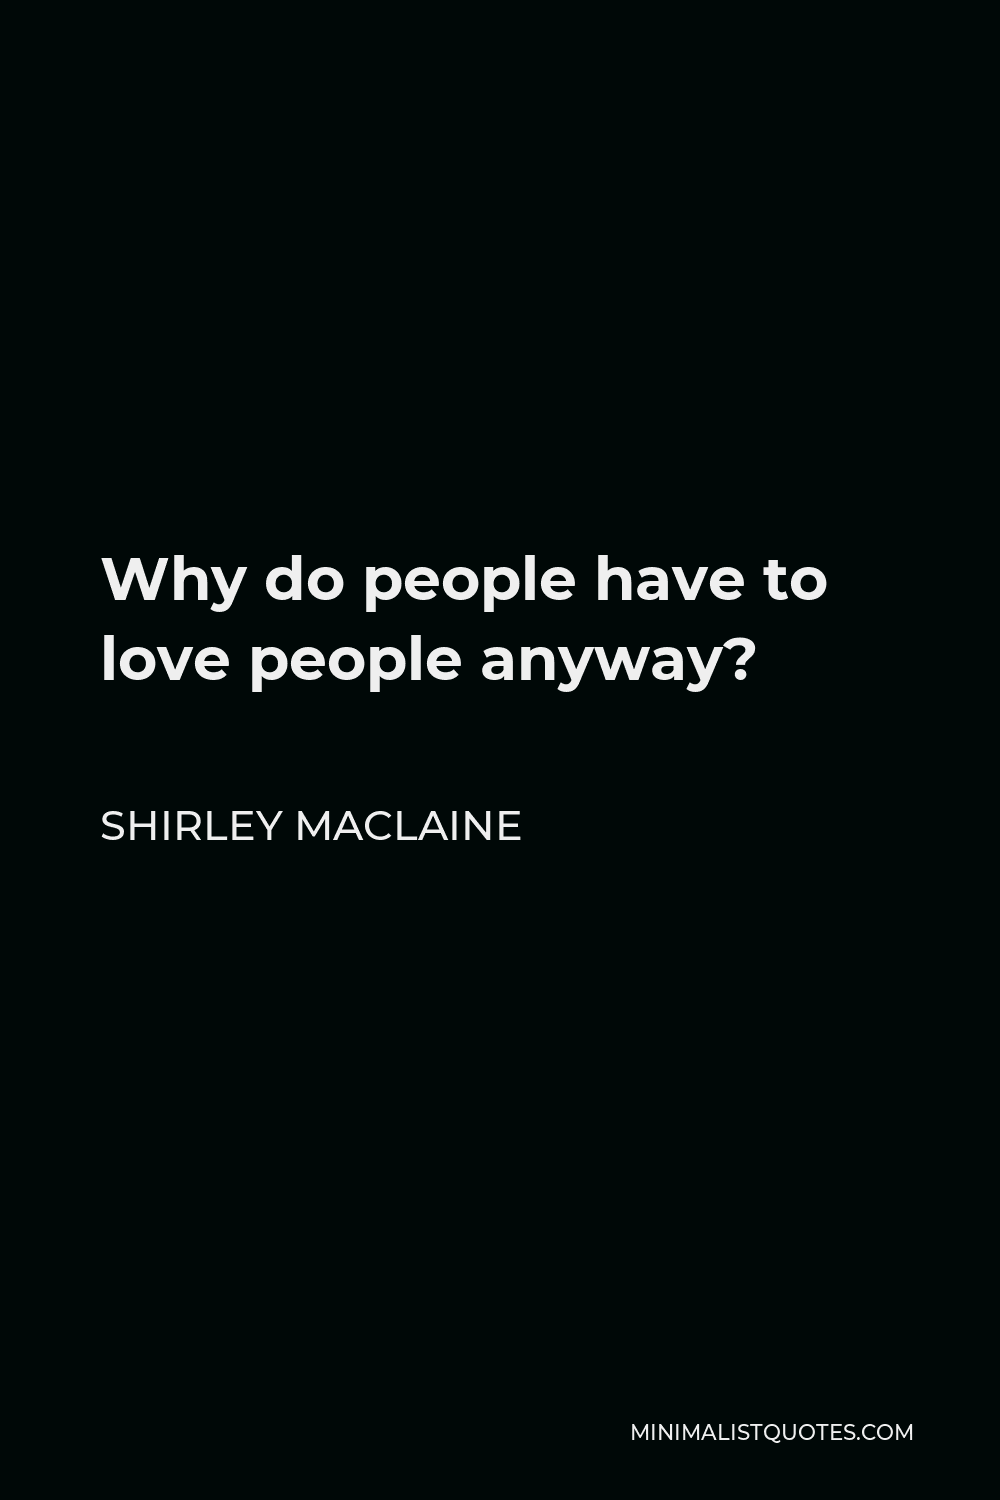 Shirley MacLaine Quote - Why do people have to love people anyway?